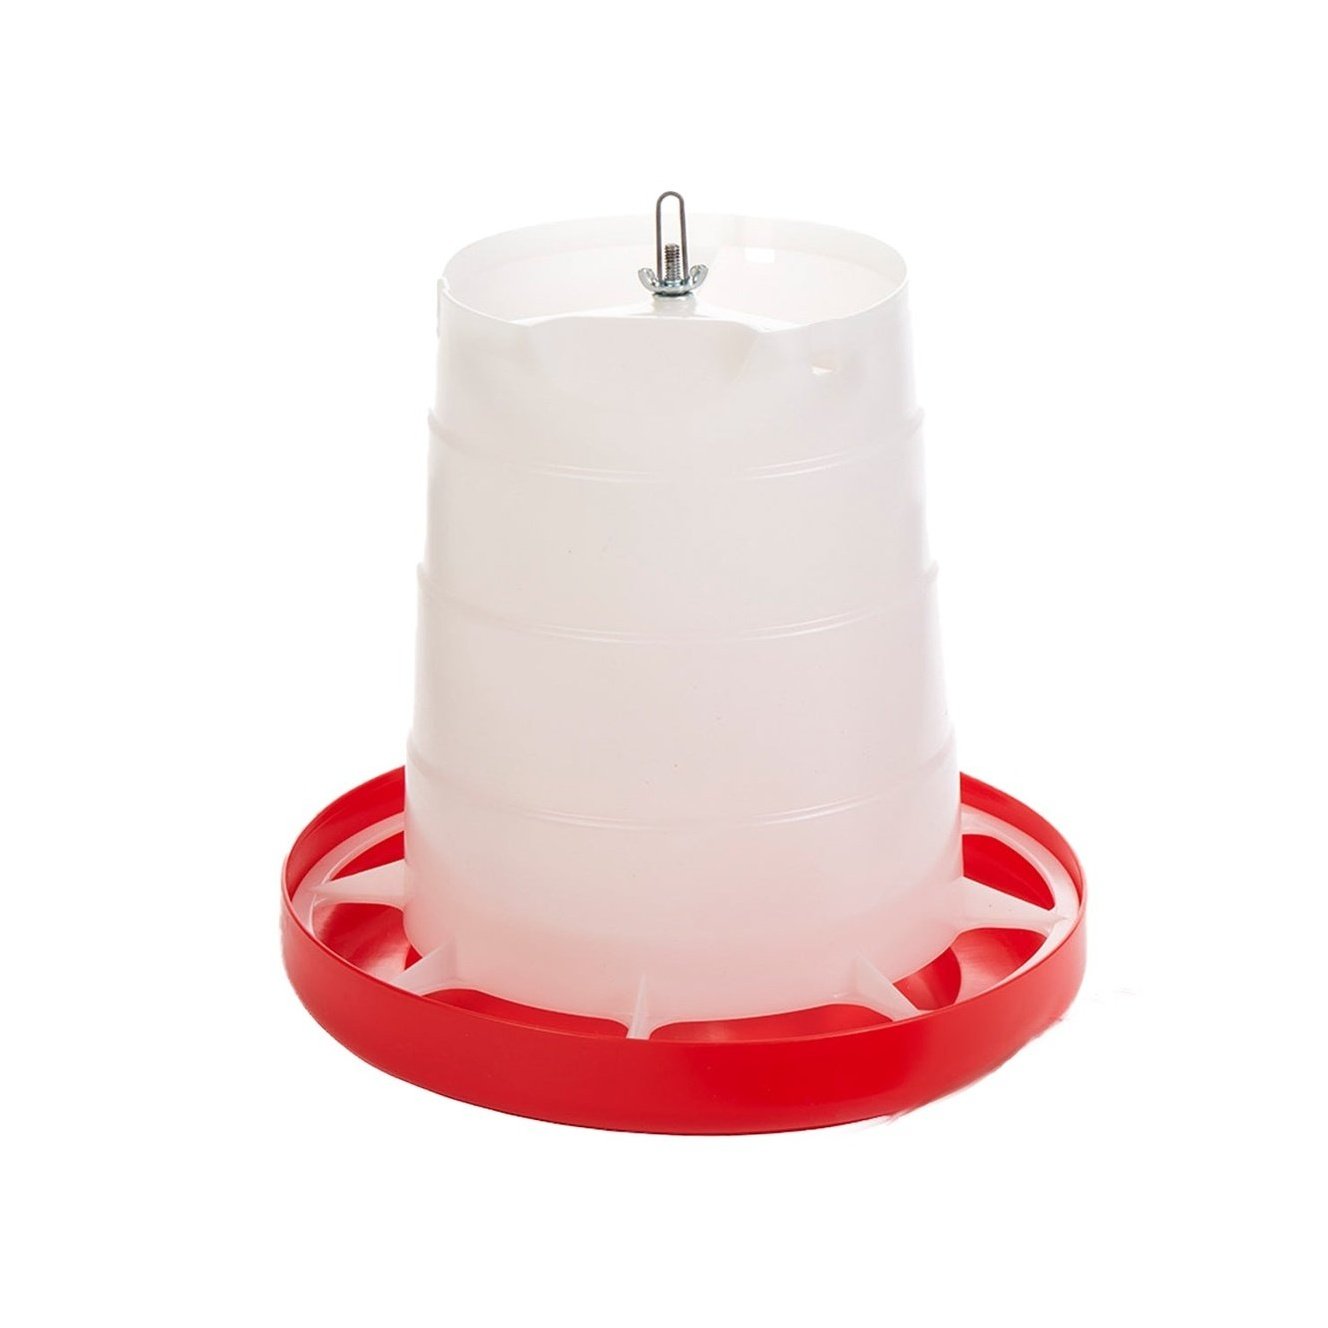 Little Giant - 11 Pound Deluxe Plastic Hanging Poultry Feeder